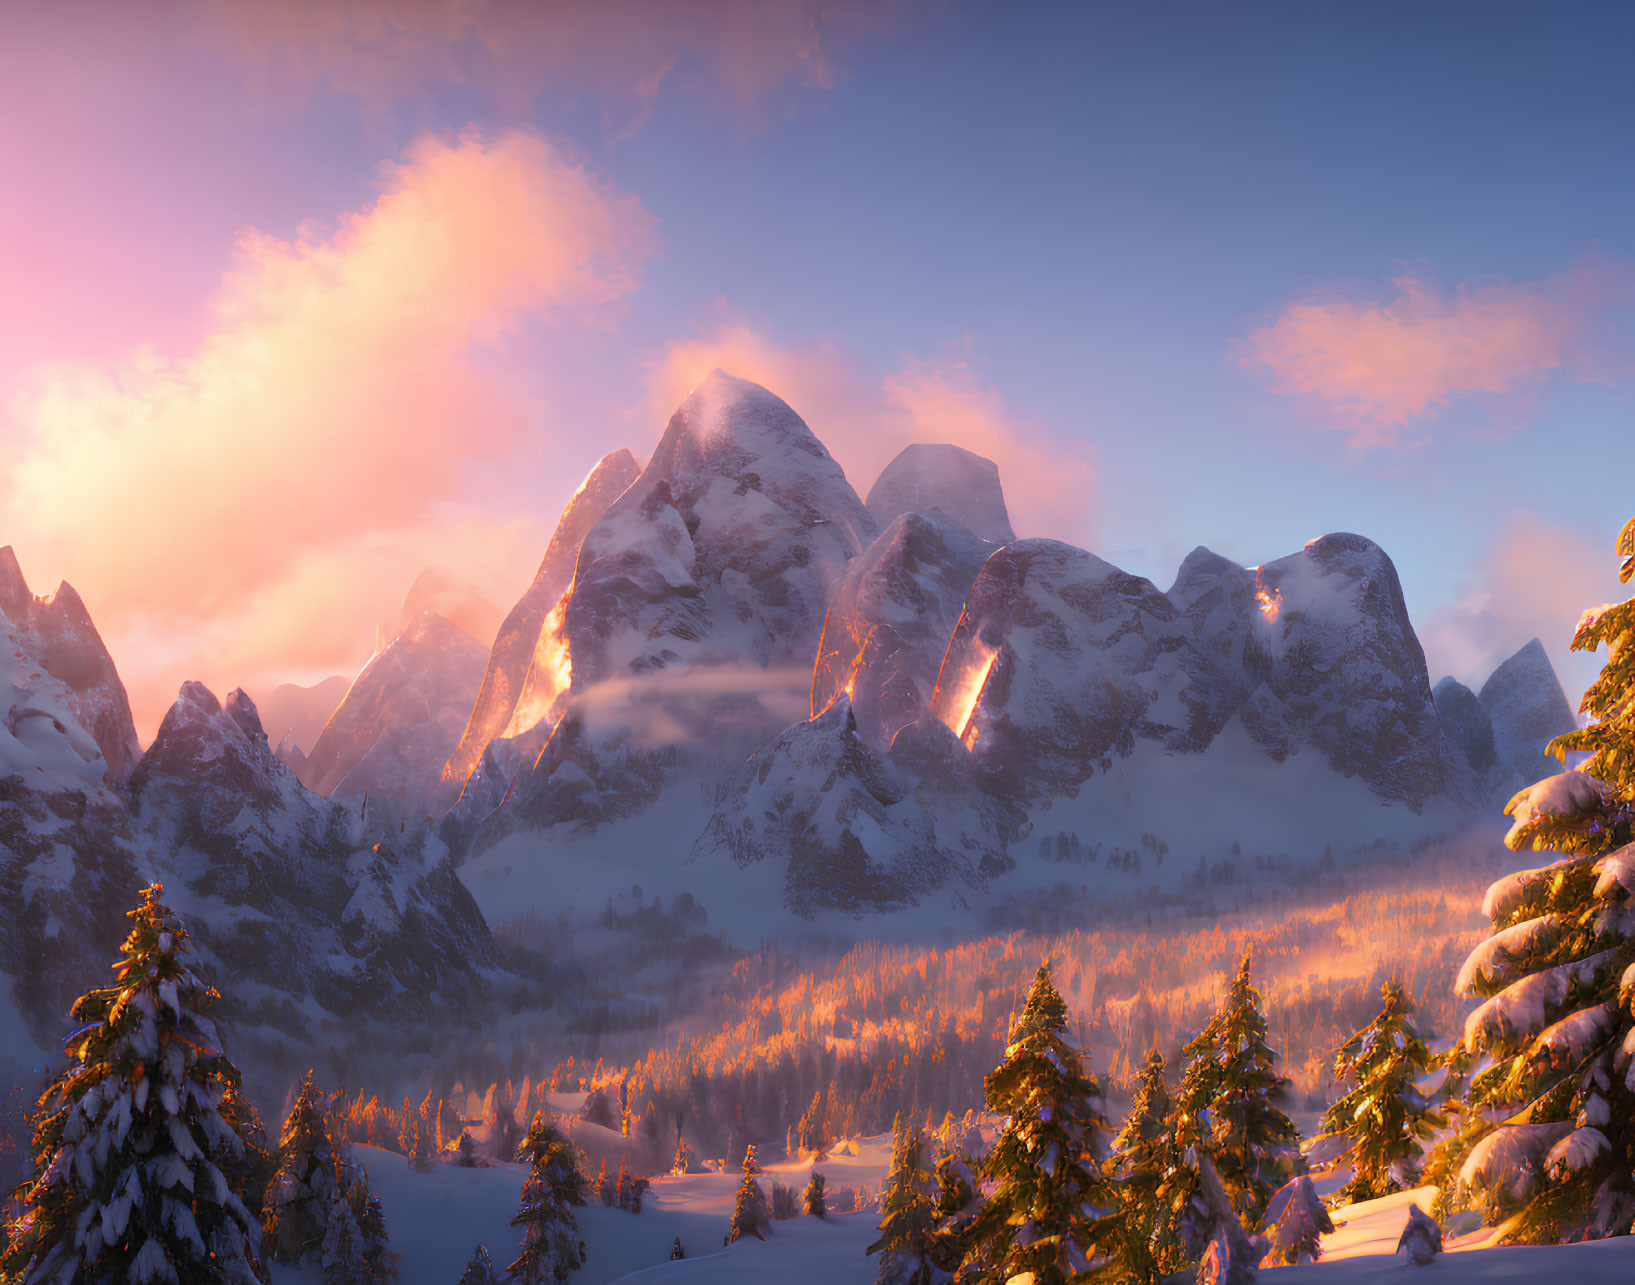 Scenic snow-covered mountains at sunrise with warm light, pine trees, and pink sky